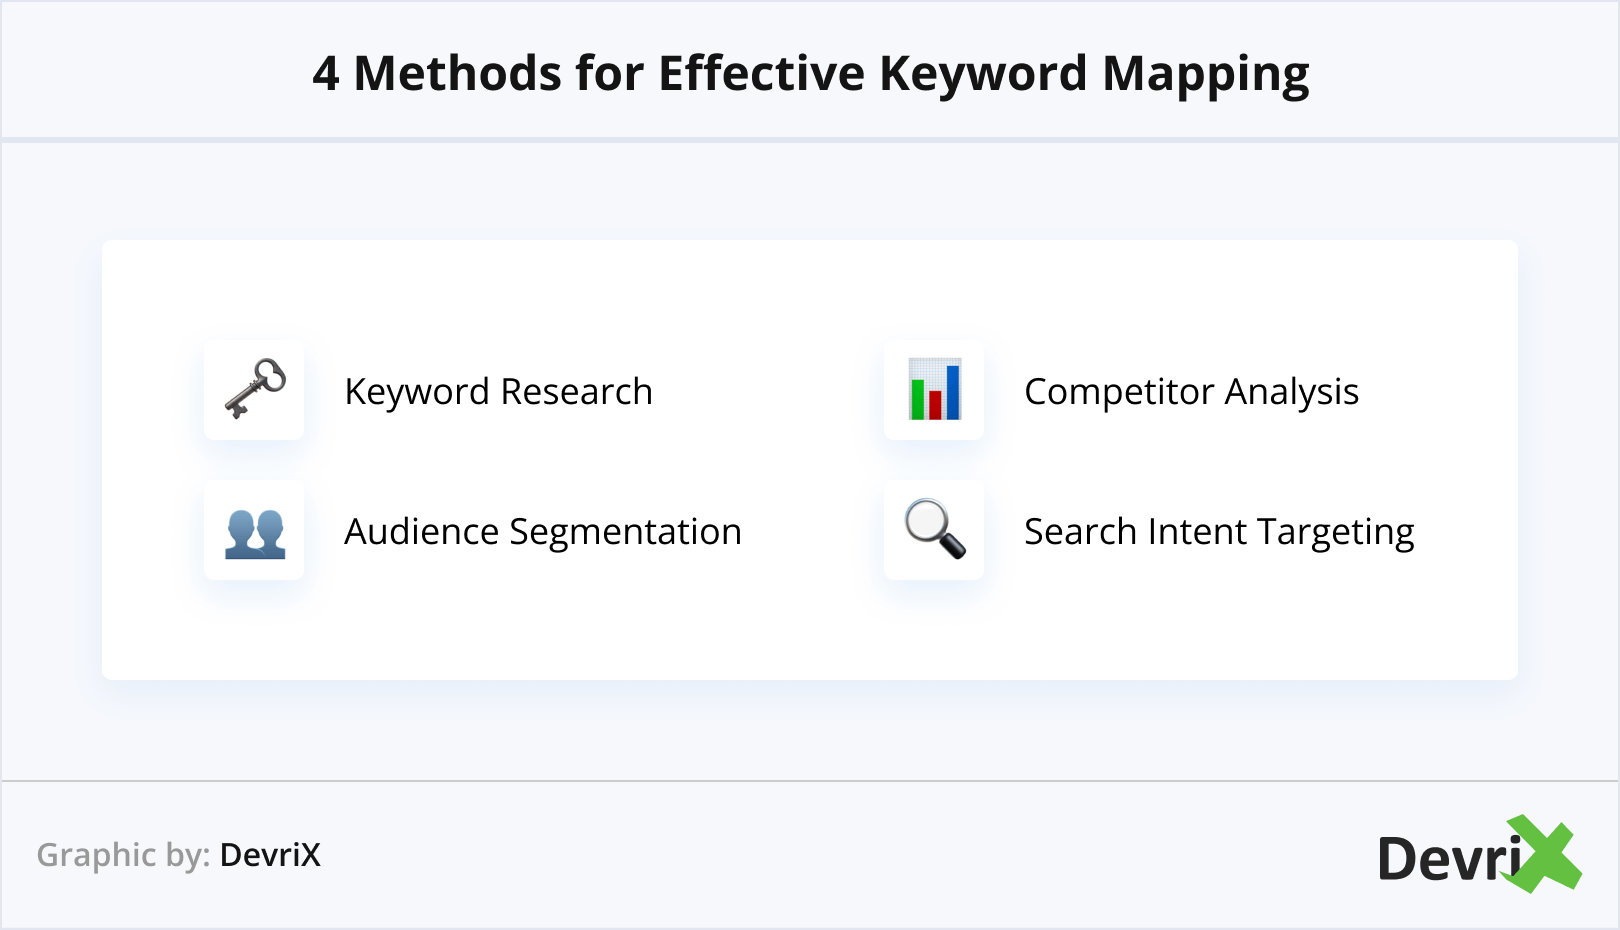 4 Methods for Effective Keyword Mapping